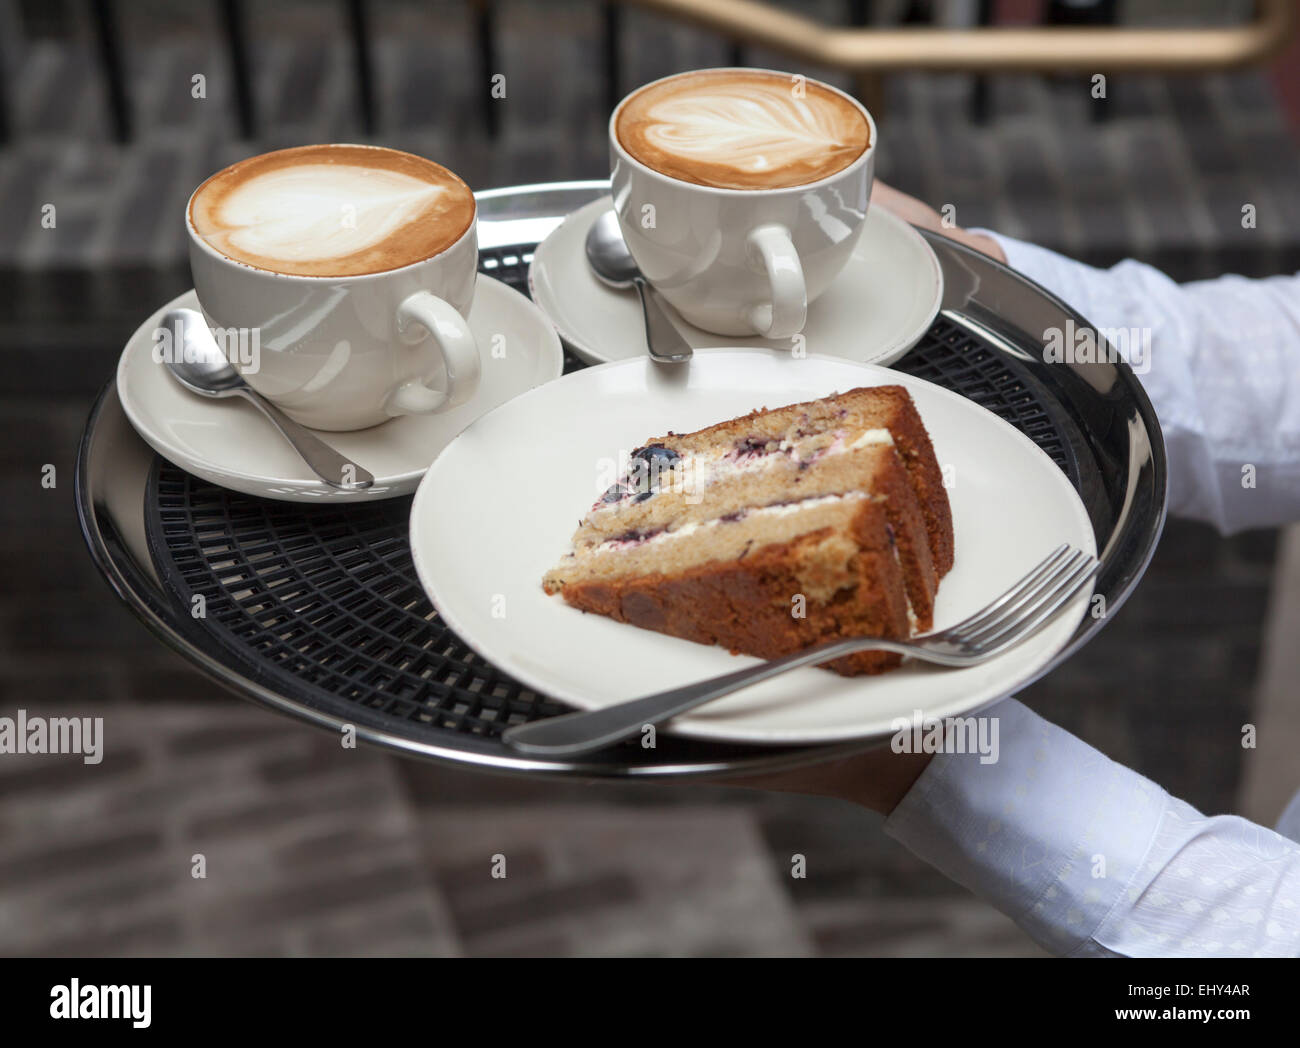 Coffee and Cake on Tray Stock Photo